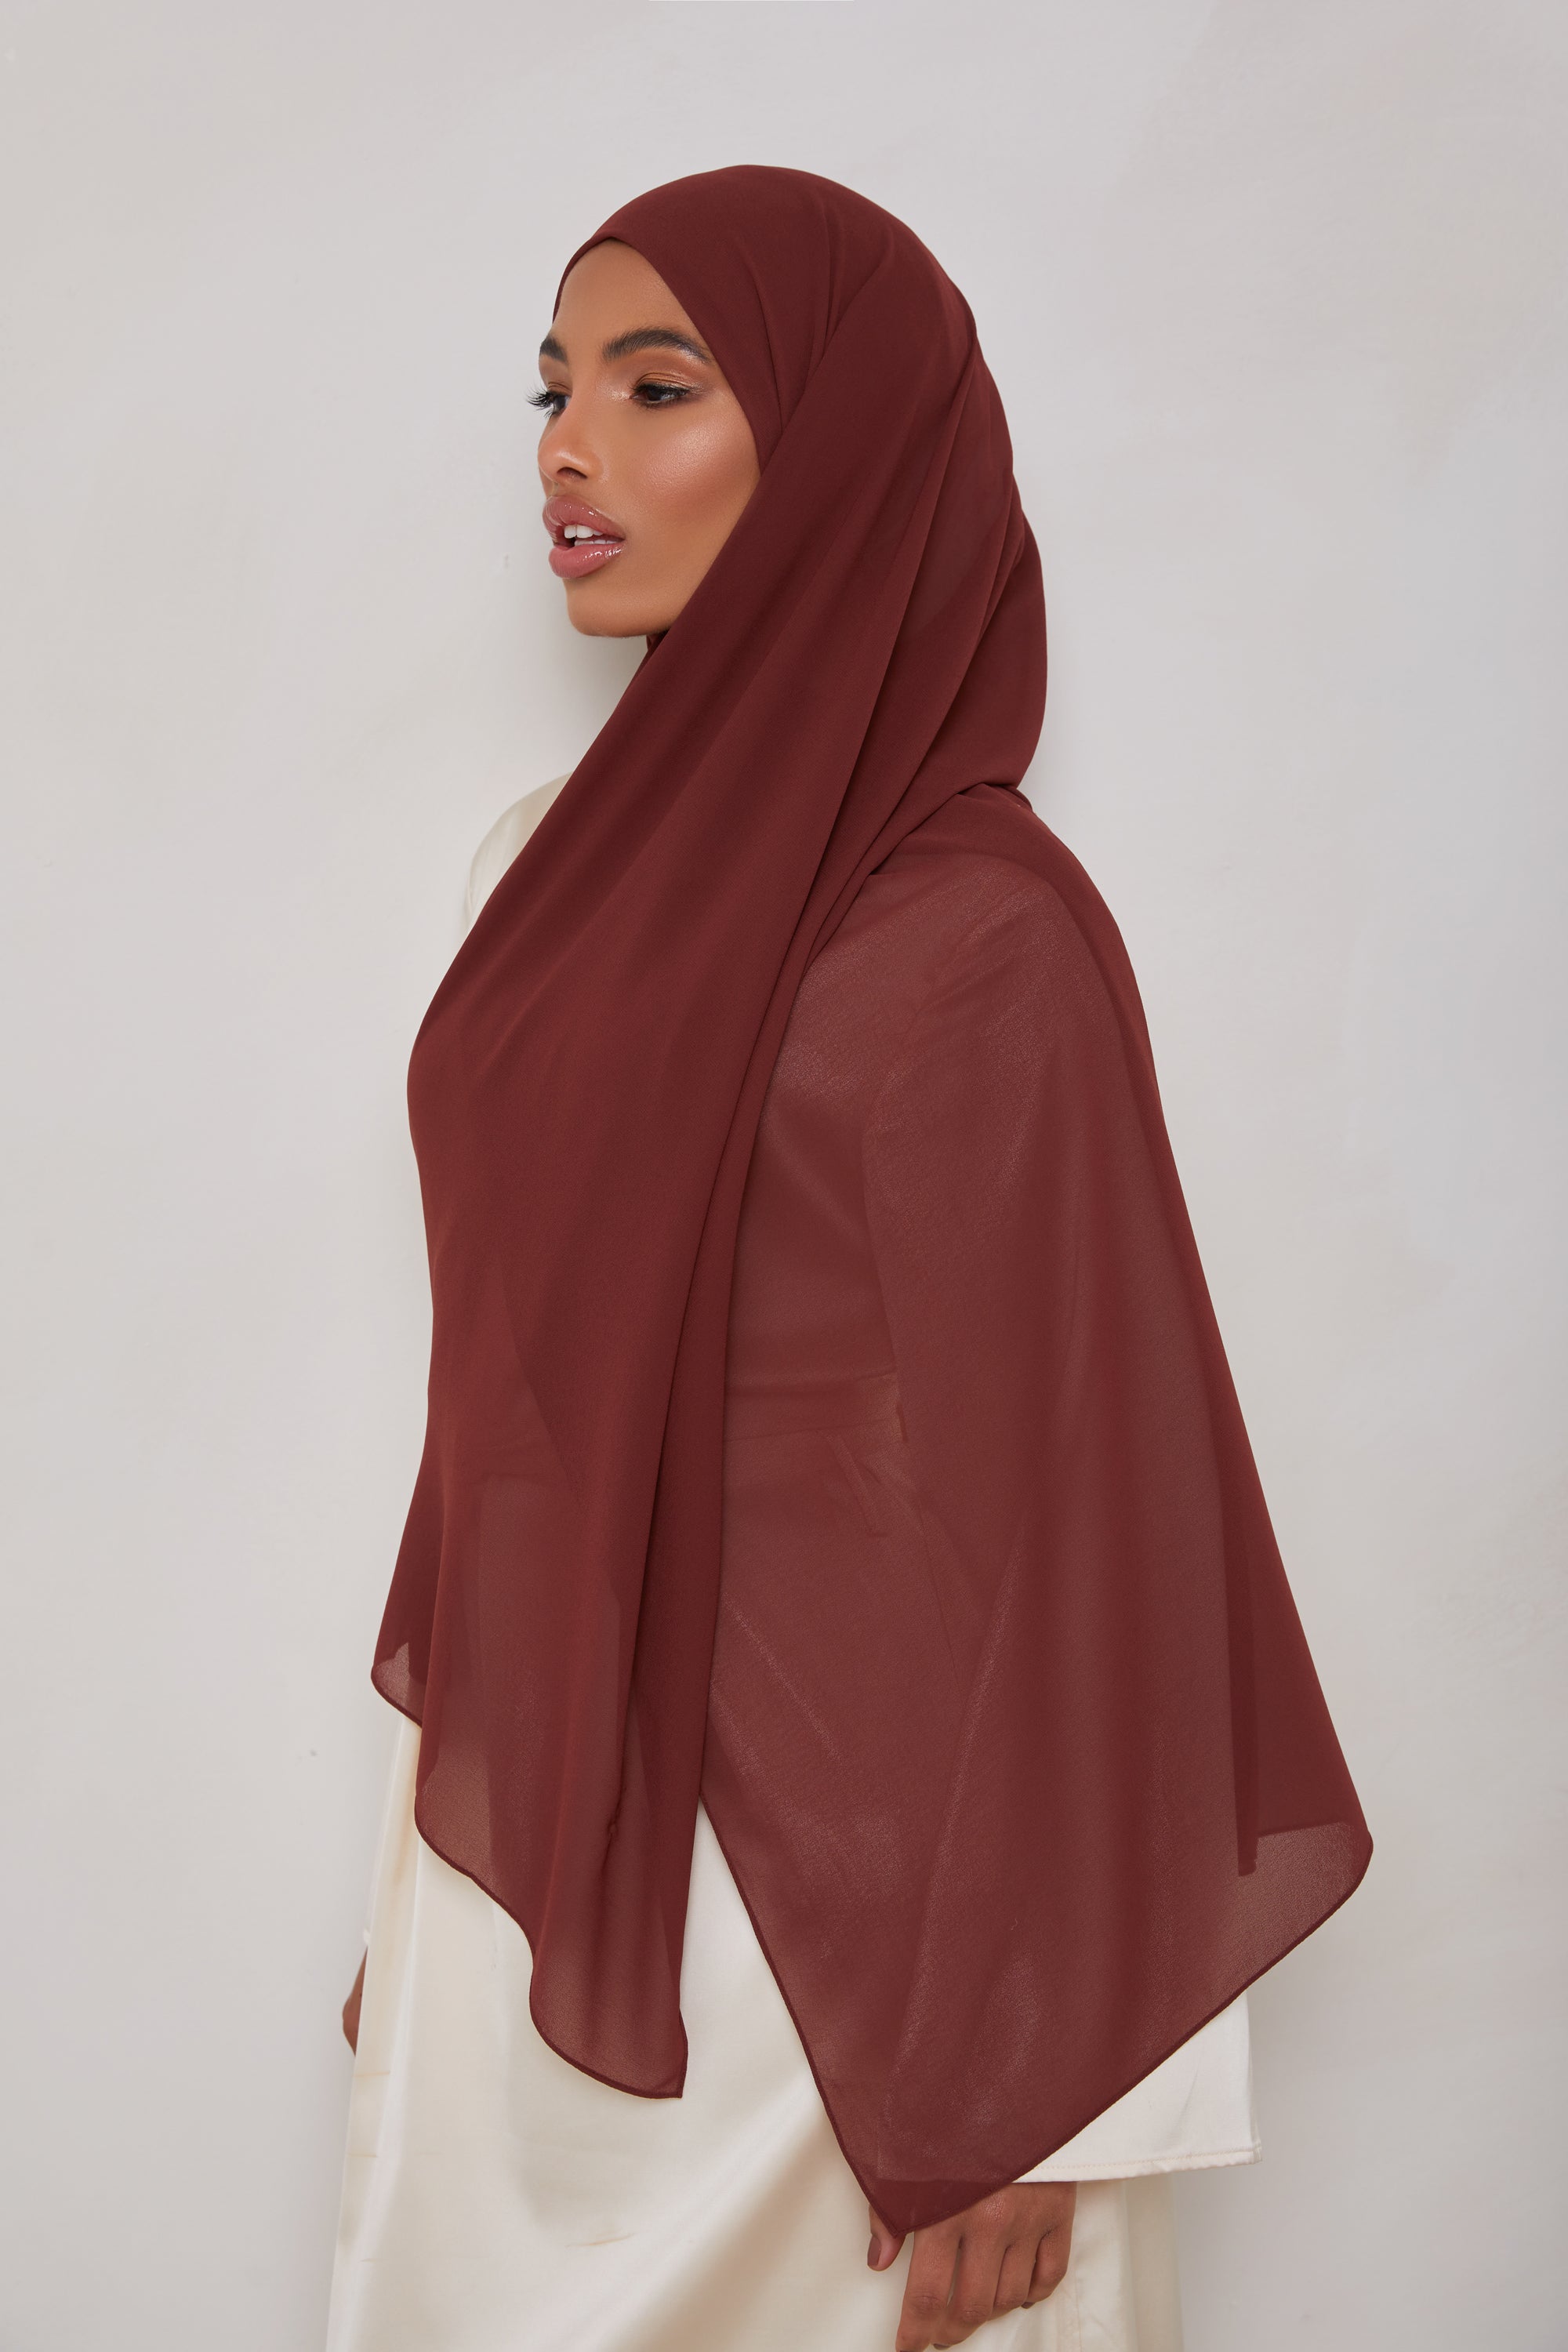 Essential Chiffon Hijab - Sable Scarves & Shawls Veiled Collection 